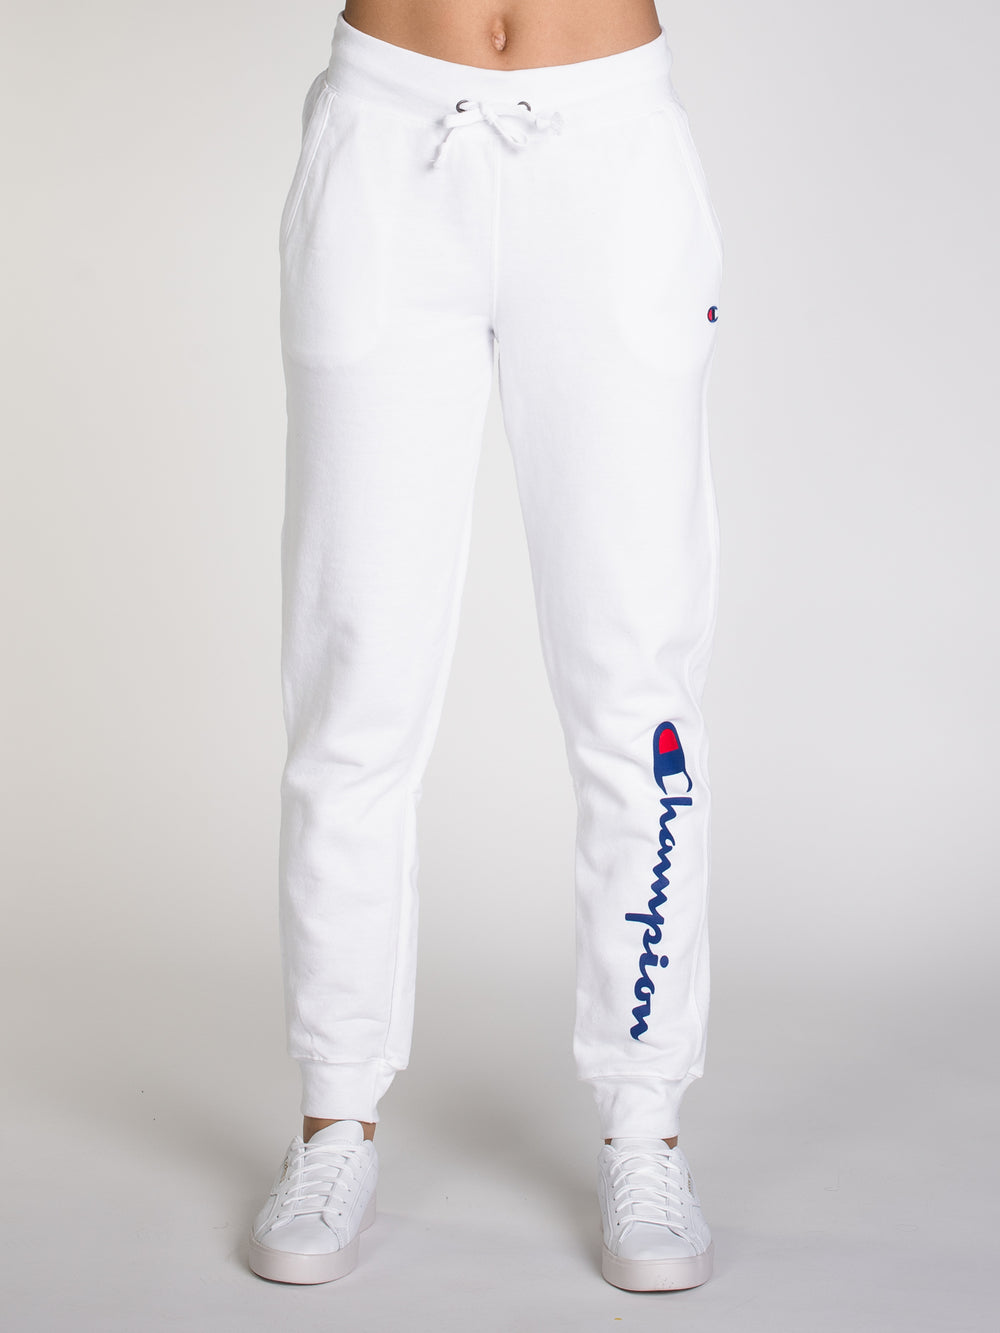 CHAMPION POWERBLEND SCRIPT JOGGER  - CLEARANCE